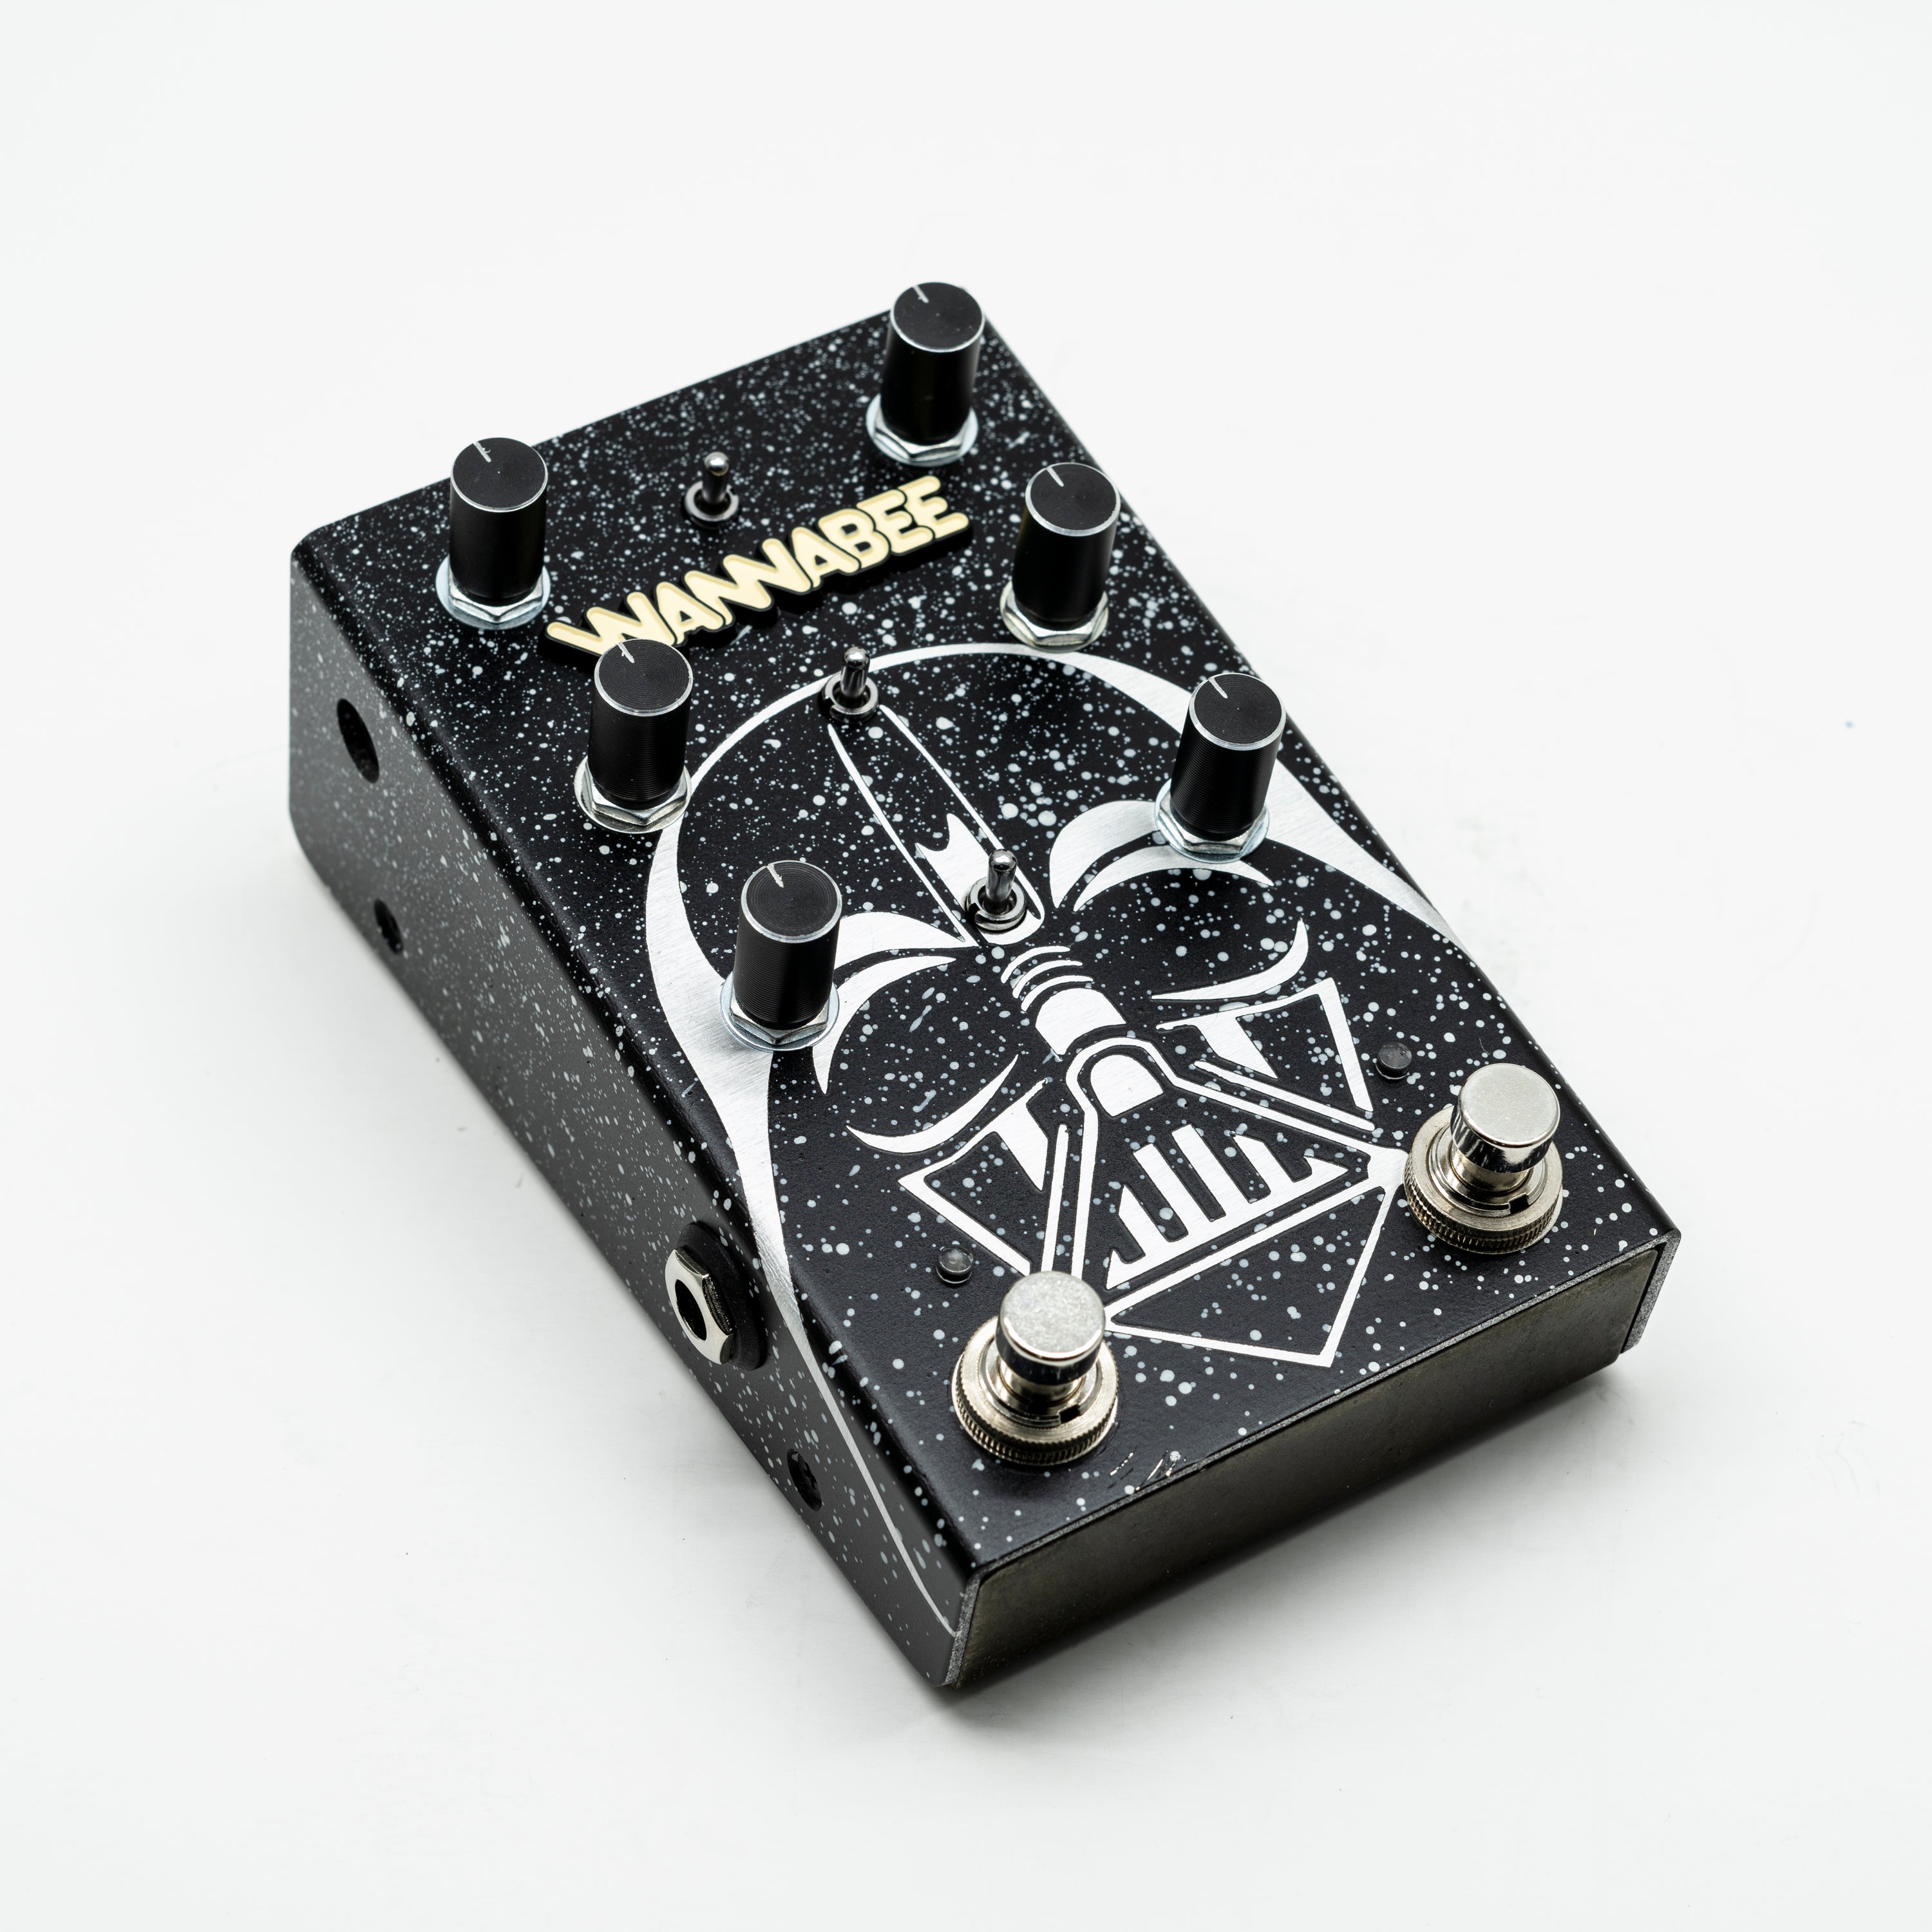 Wannabee Beelateral Buzz • Custom Shop • Revenge of the 5th